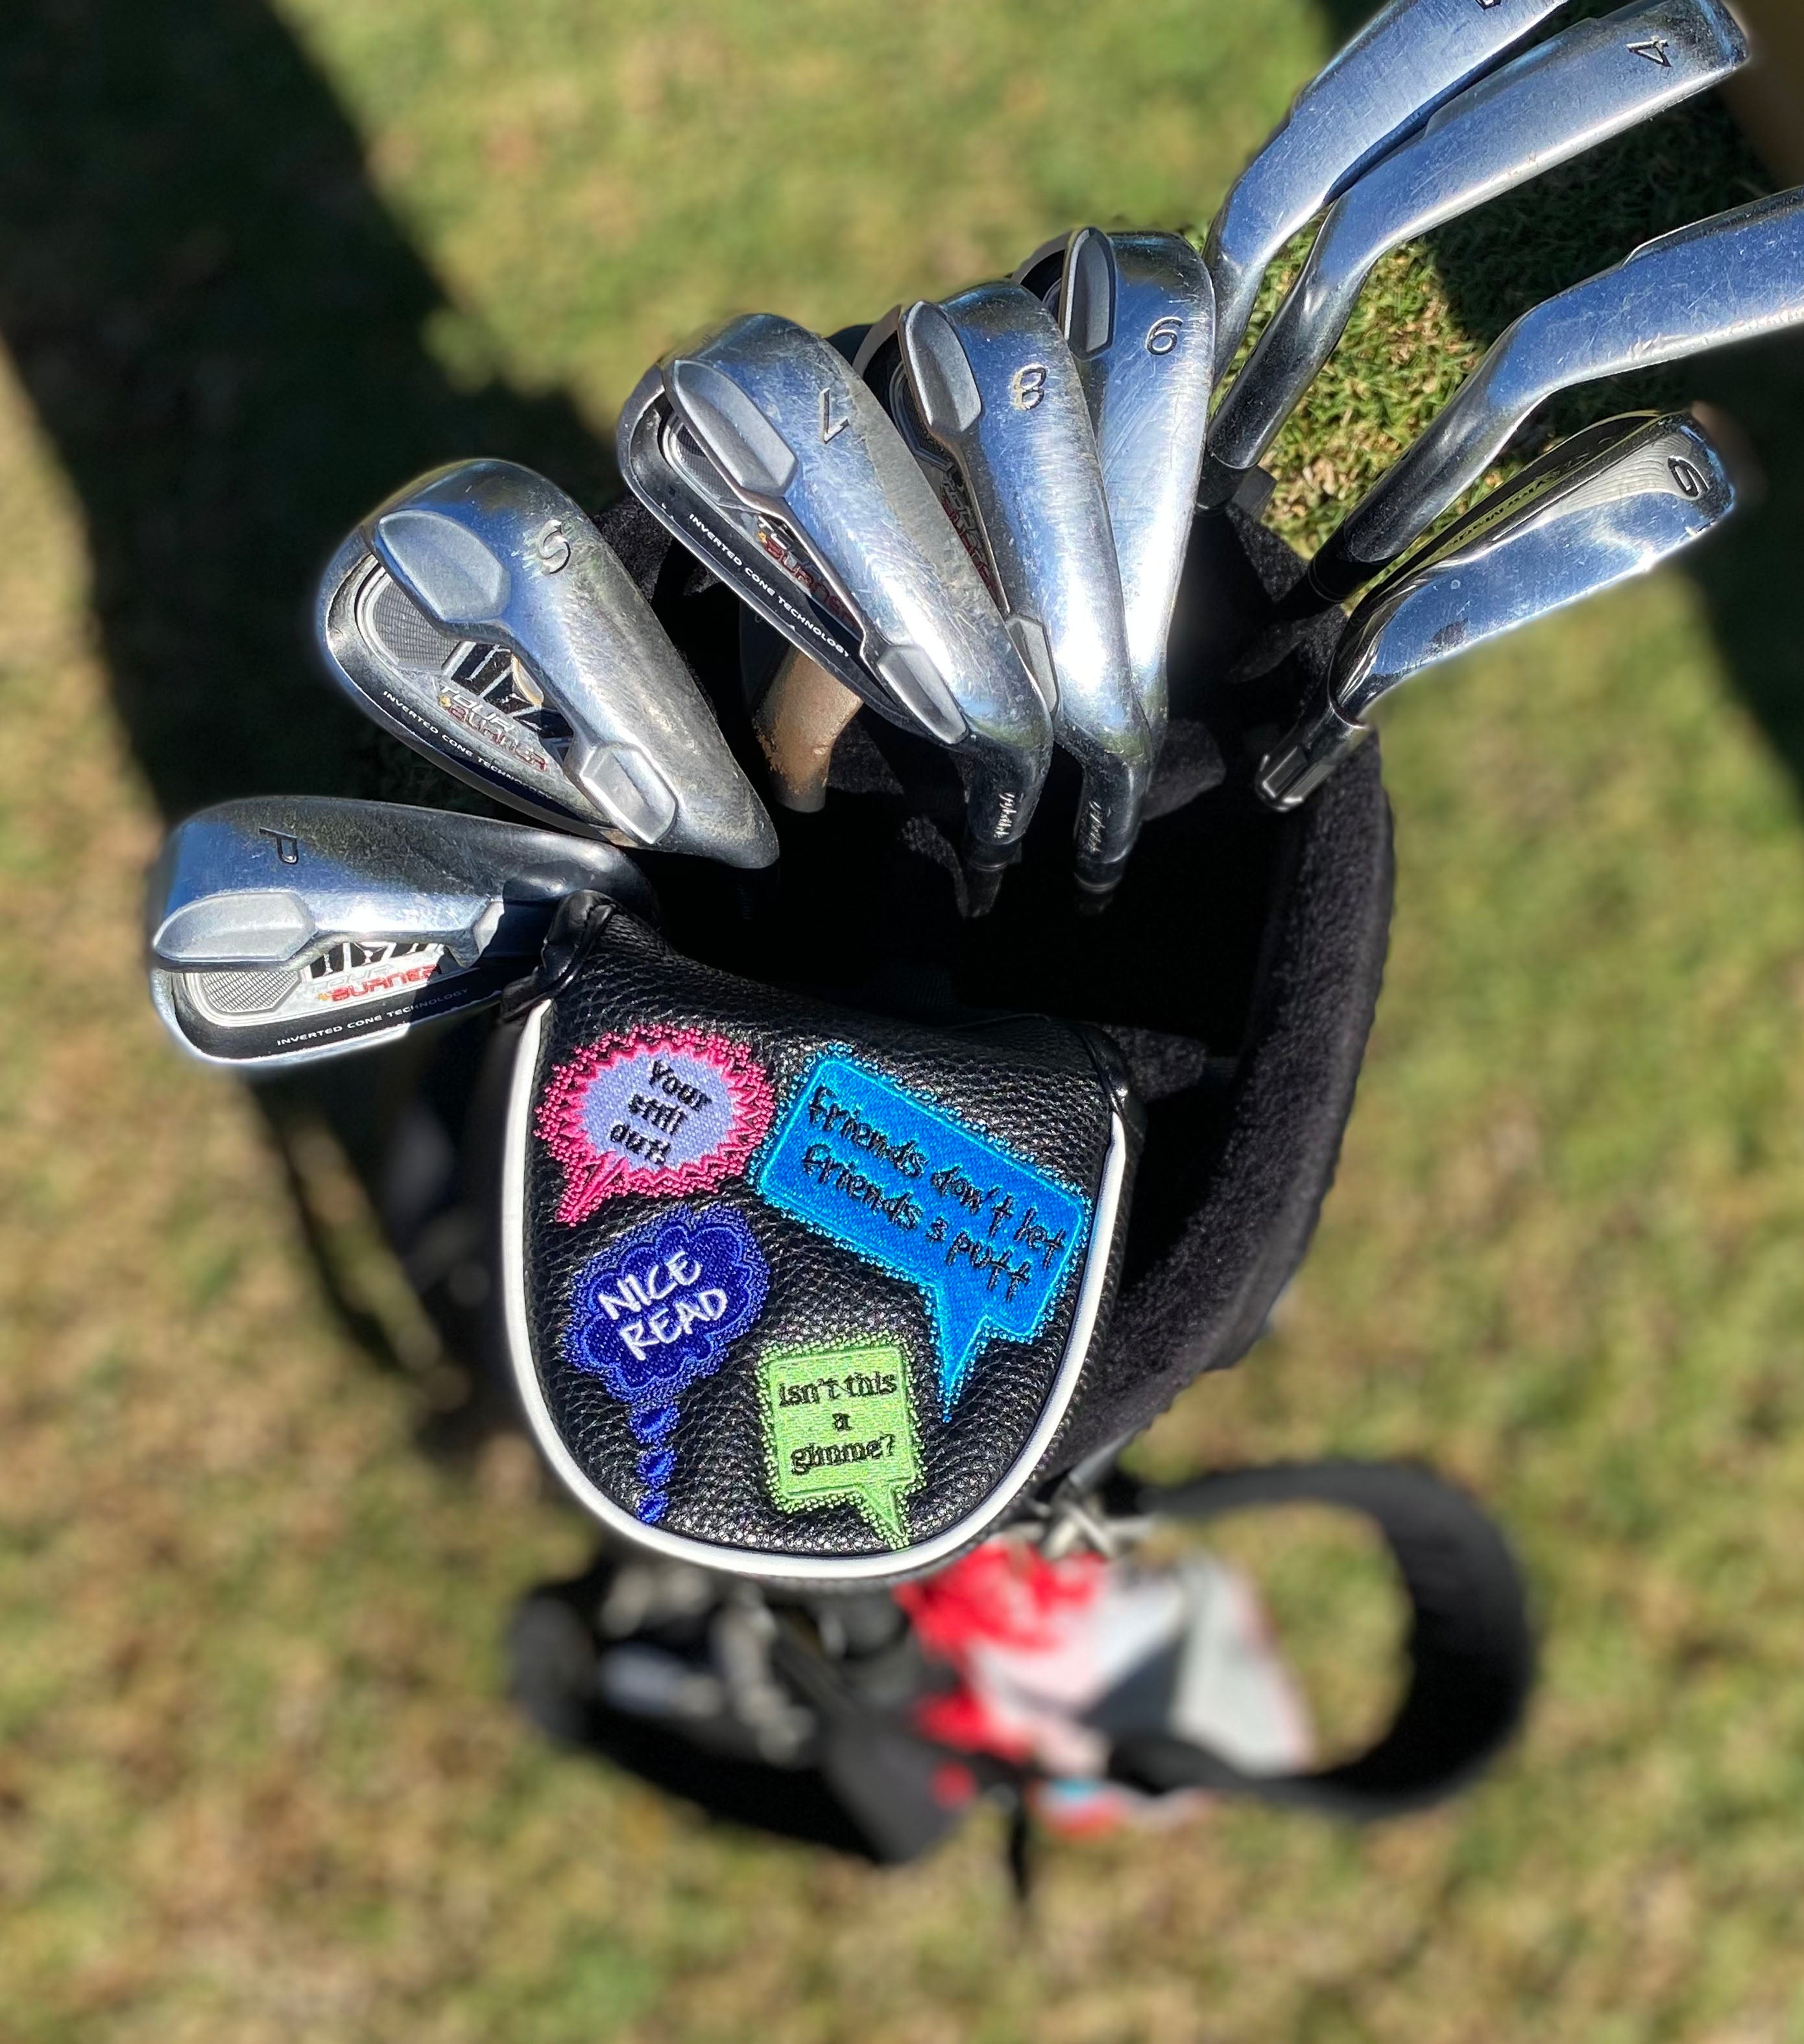 Mallet & Blade Putter Covers | Unique Golf Putter Covers | Giggle Golf